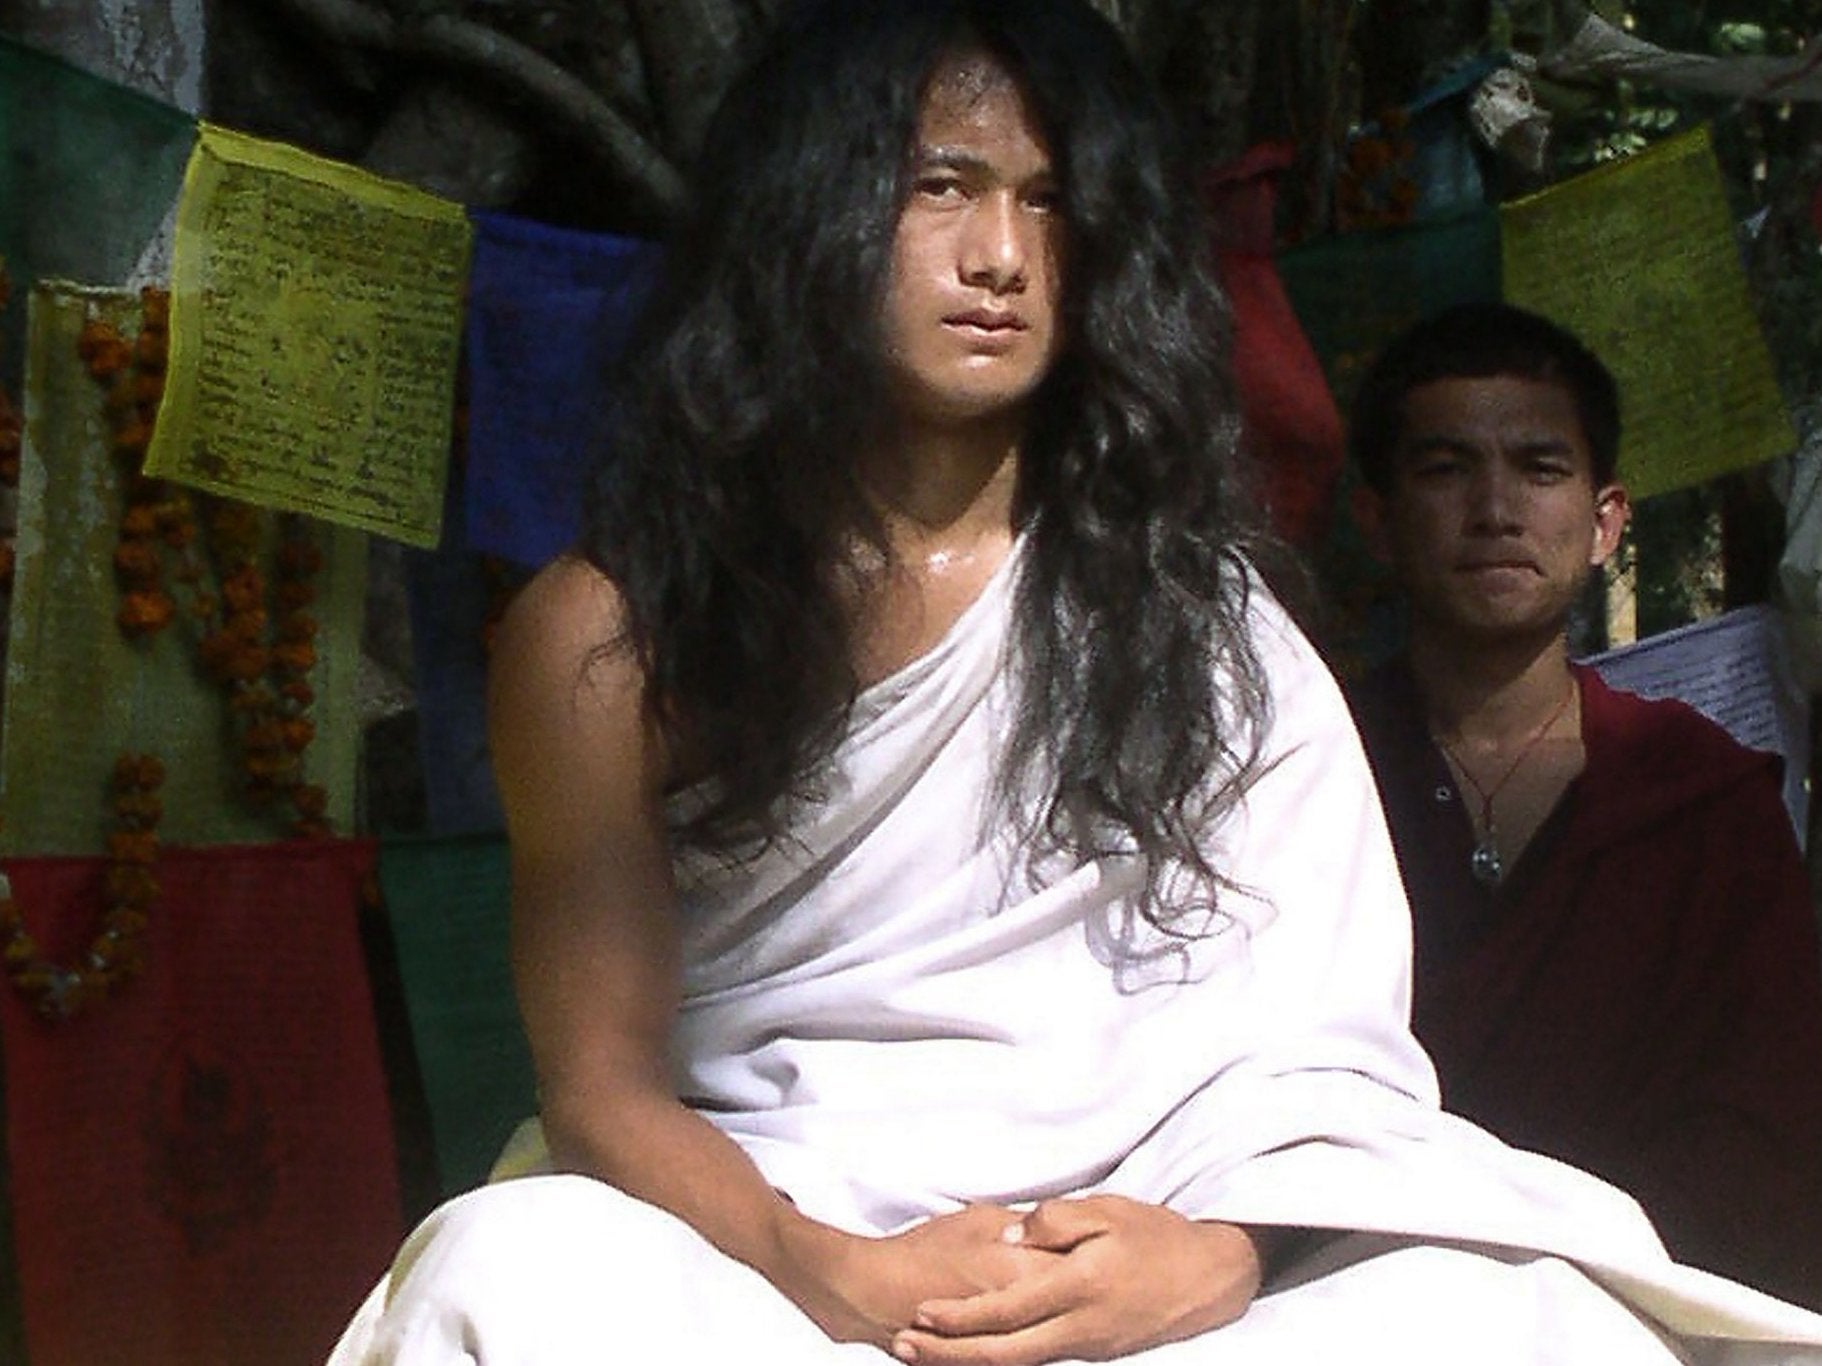 Ram Bahadur Bomjon achieved fame after apparently meditating under tree for 10 months